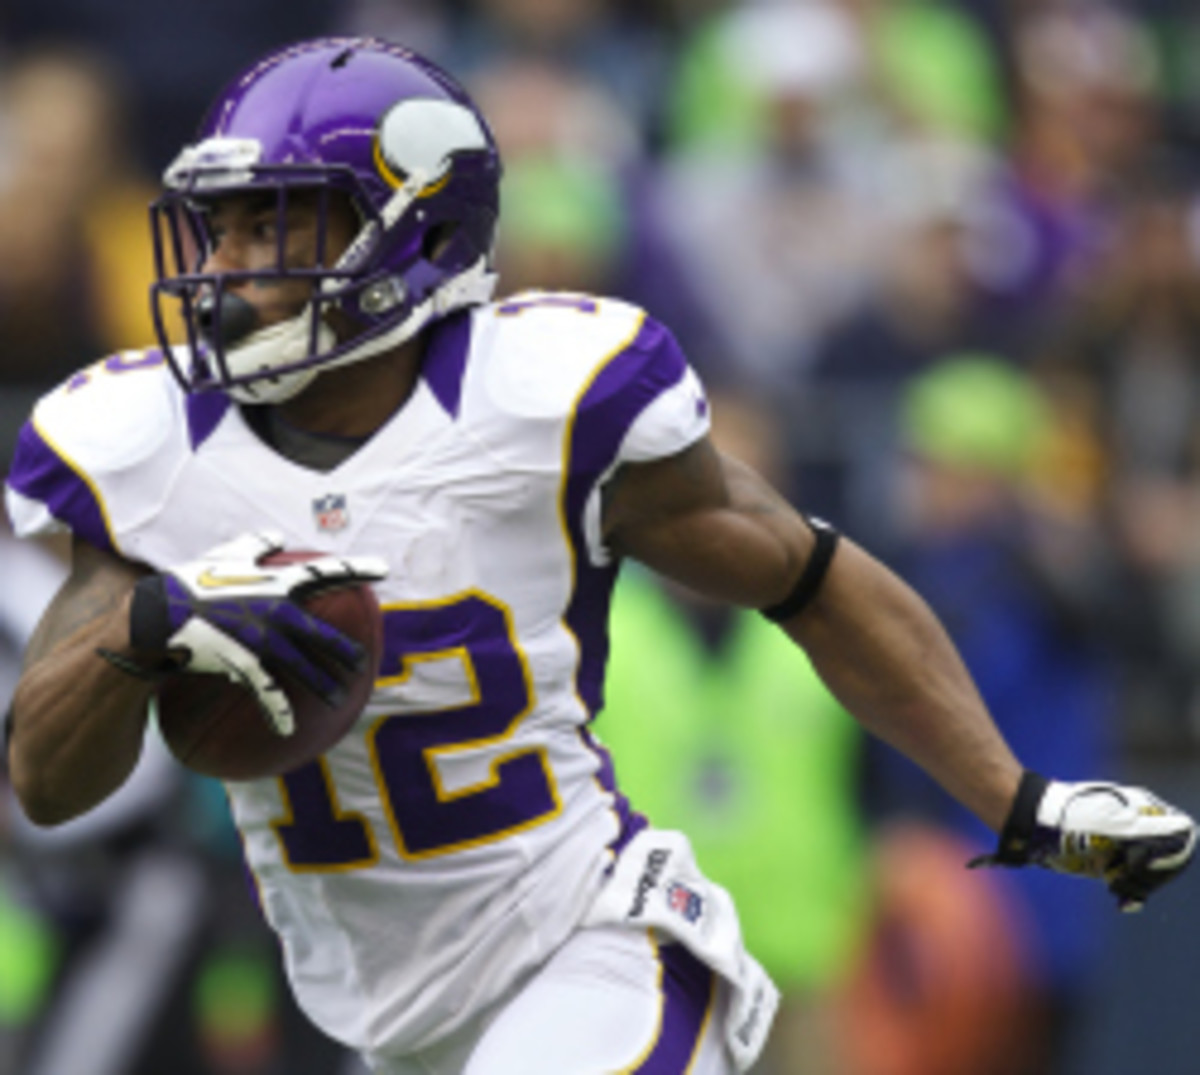 Vikings Hall of Famer Cris Carter said the team was better off without Percy Harvin because of his high salary and likelihood of getting injured. (Stephen Brashear/Getty Images)